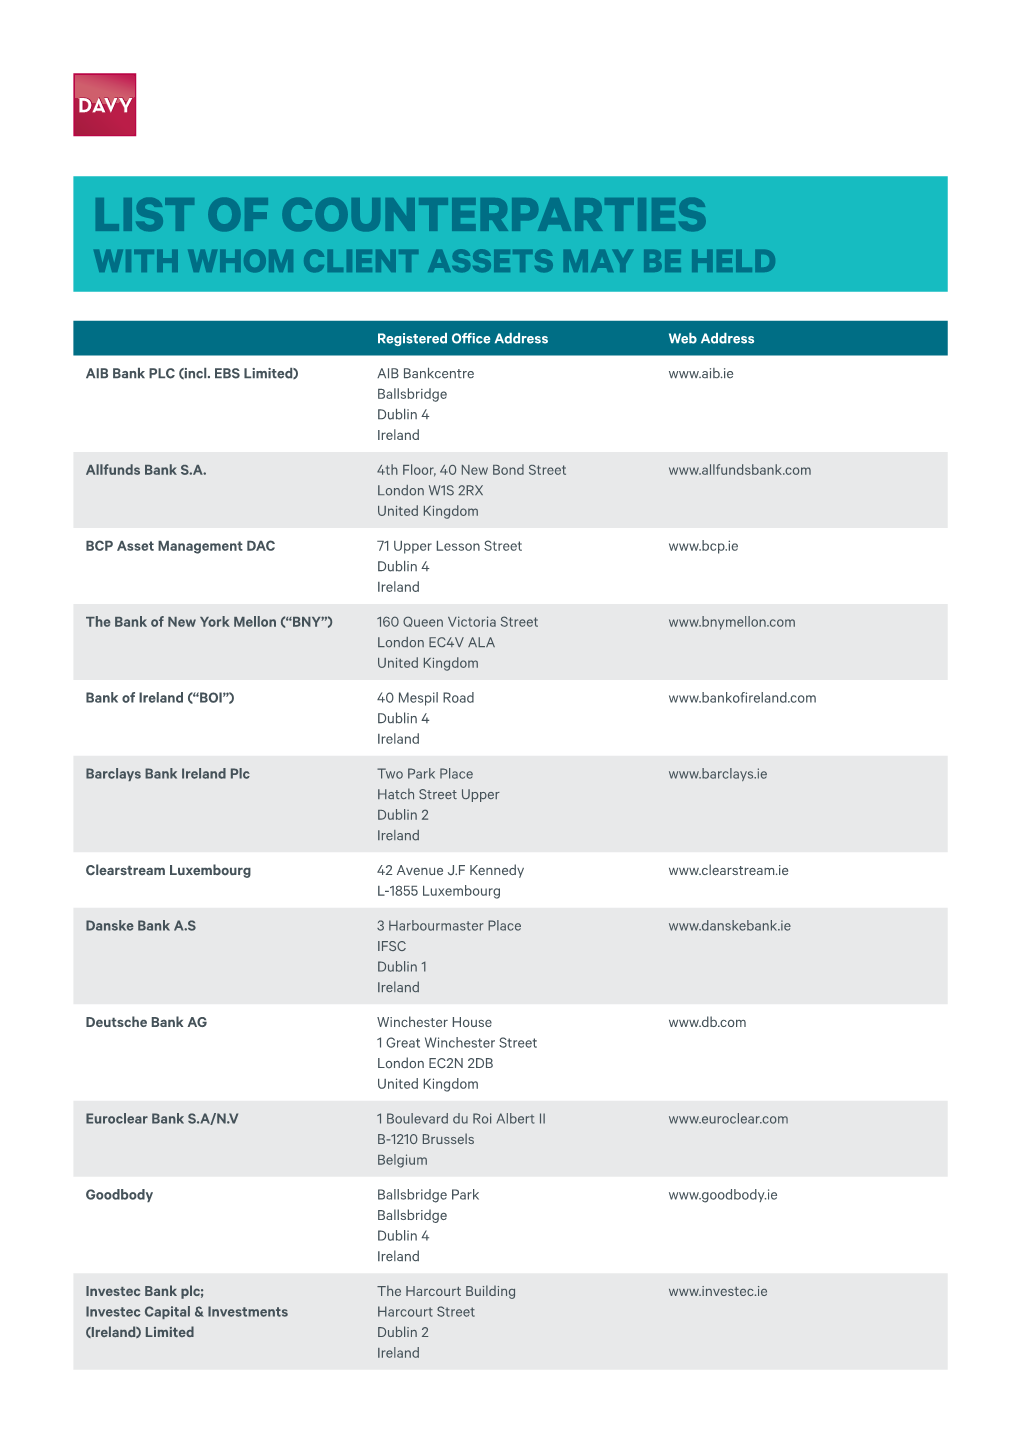 List of Counterparties with Whom Client Assets May Be Held